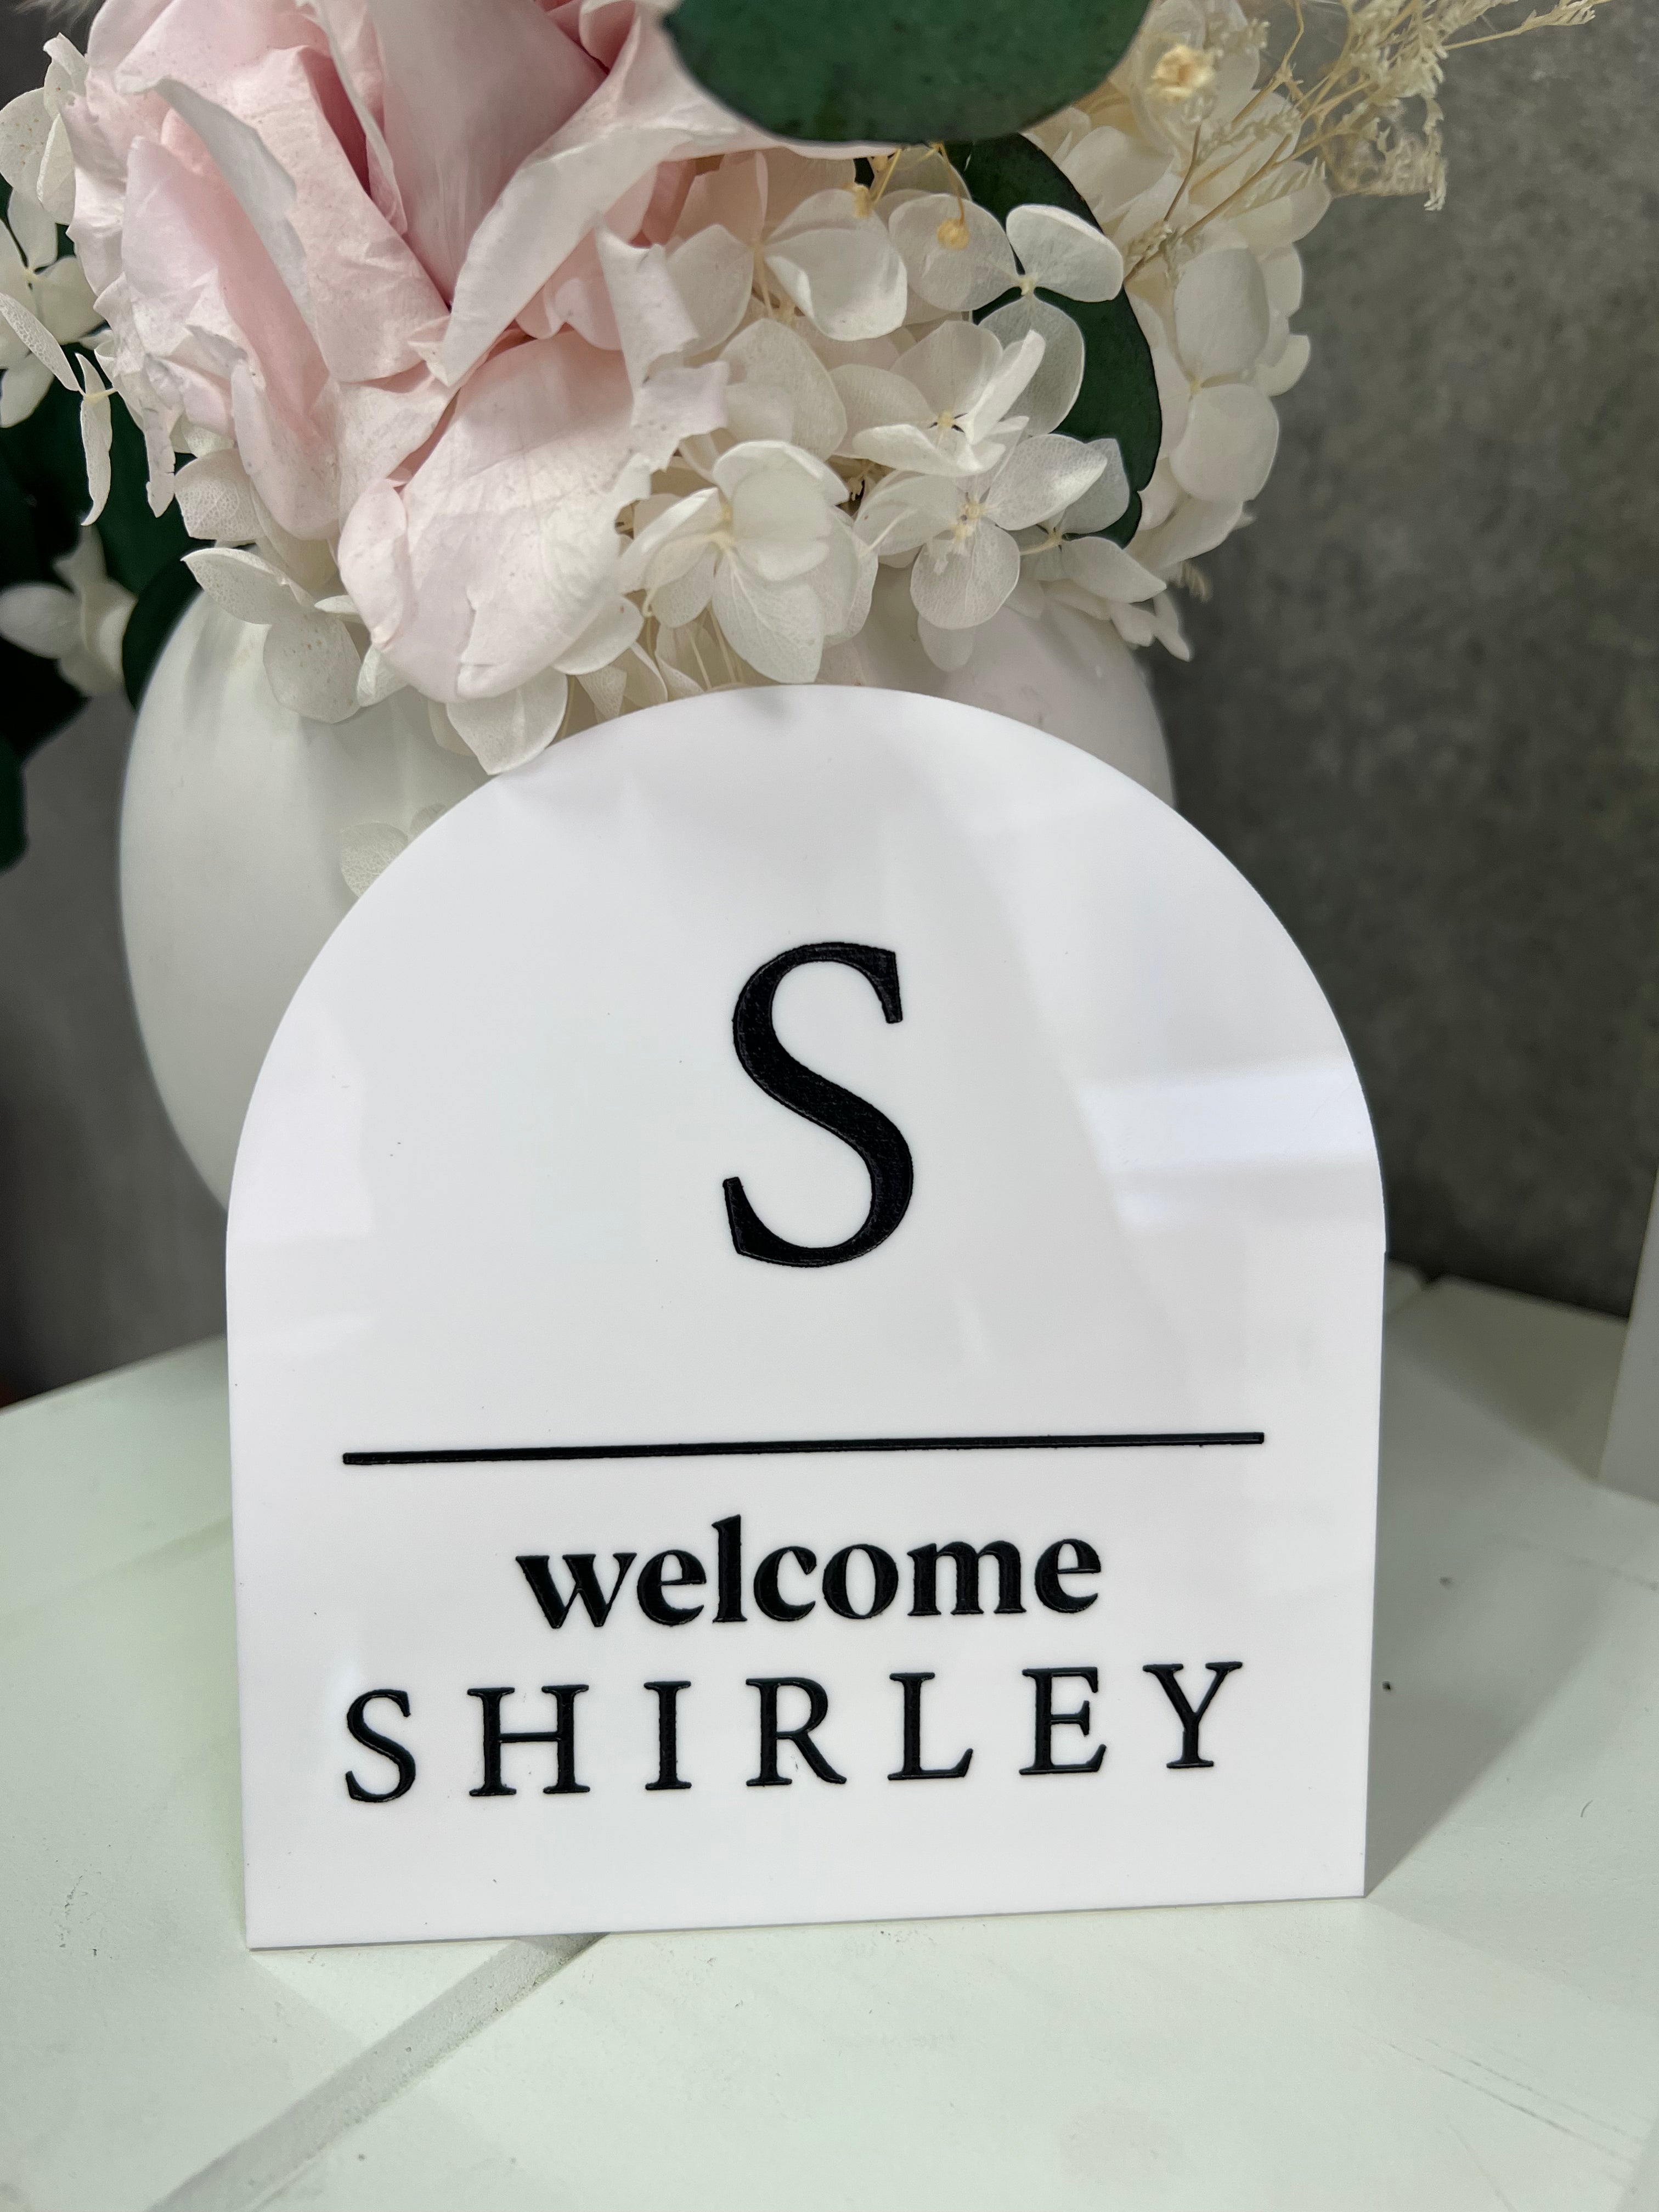 Acrylic arch place cards